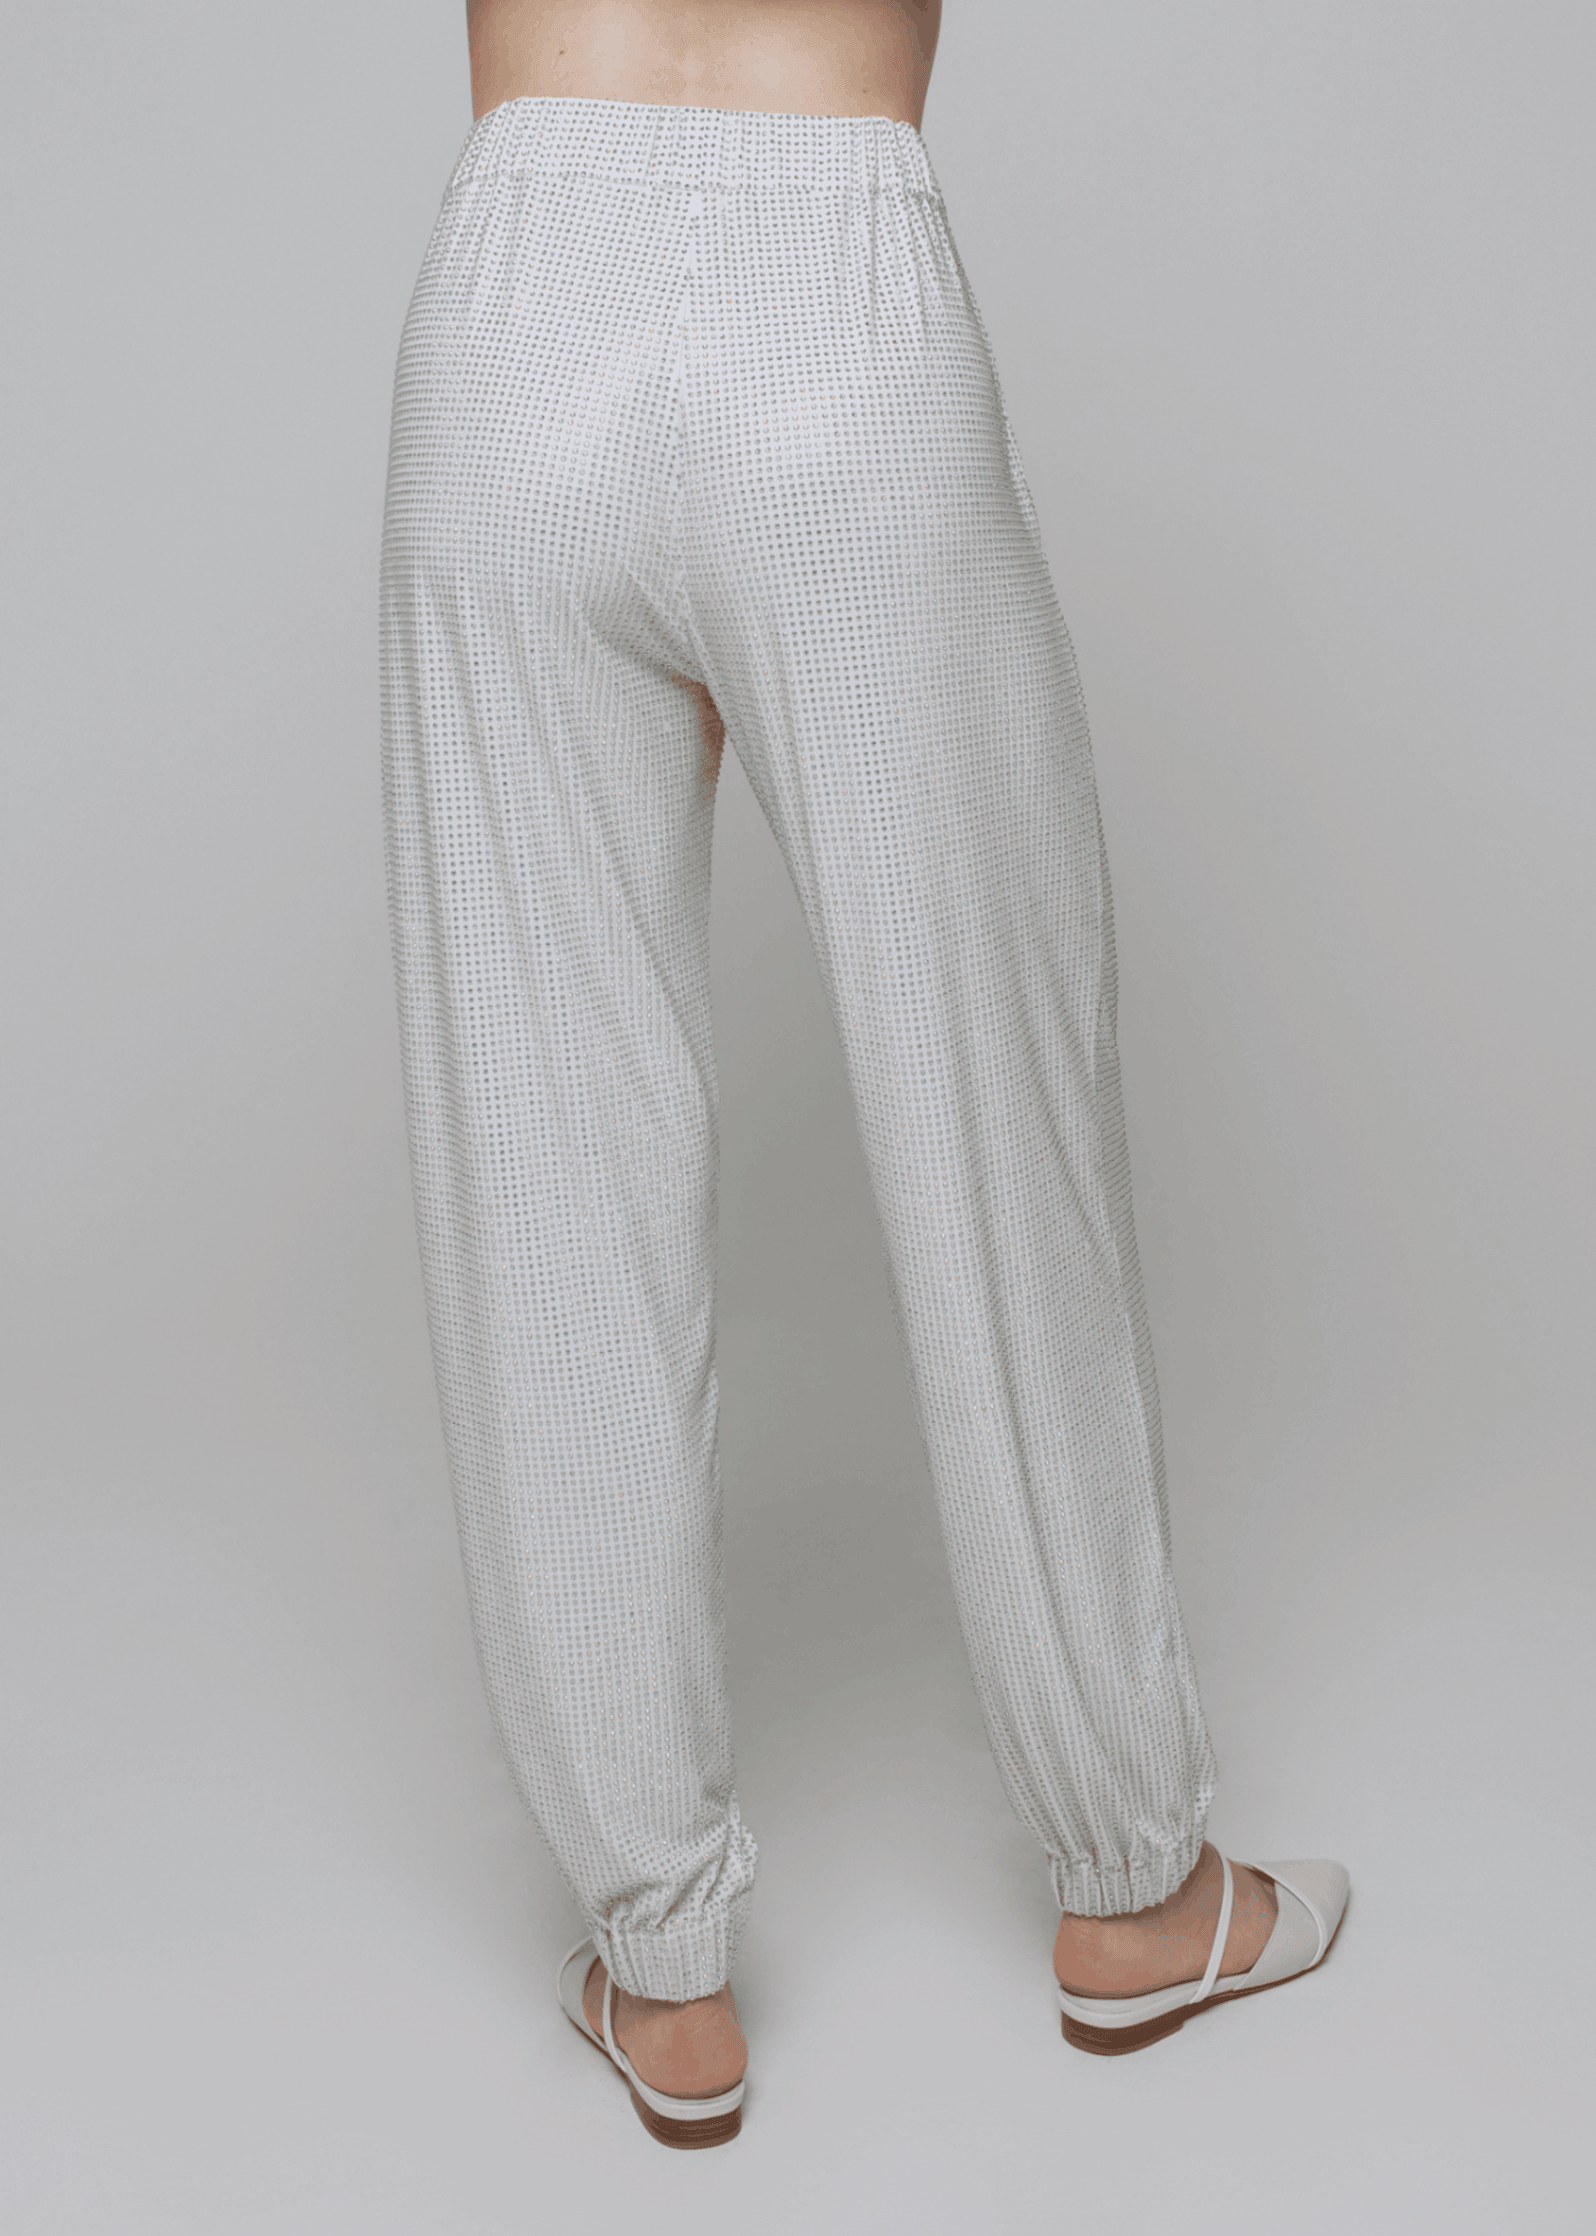 Exquisite detail of Axinia Crystal Harem Pants showcasing the fine craftsmanship and elegant design characteristic of Axinia Collection 's luxury collection.